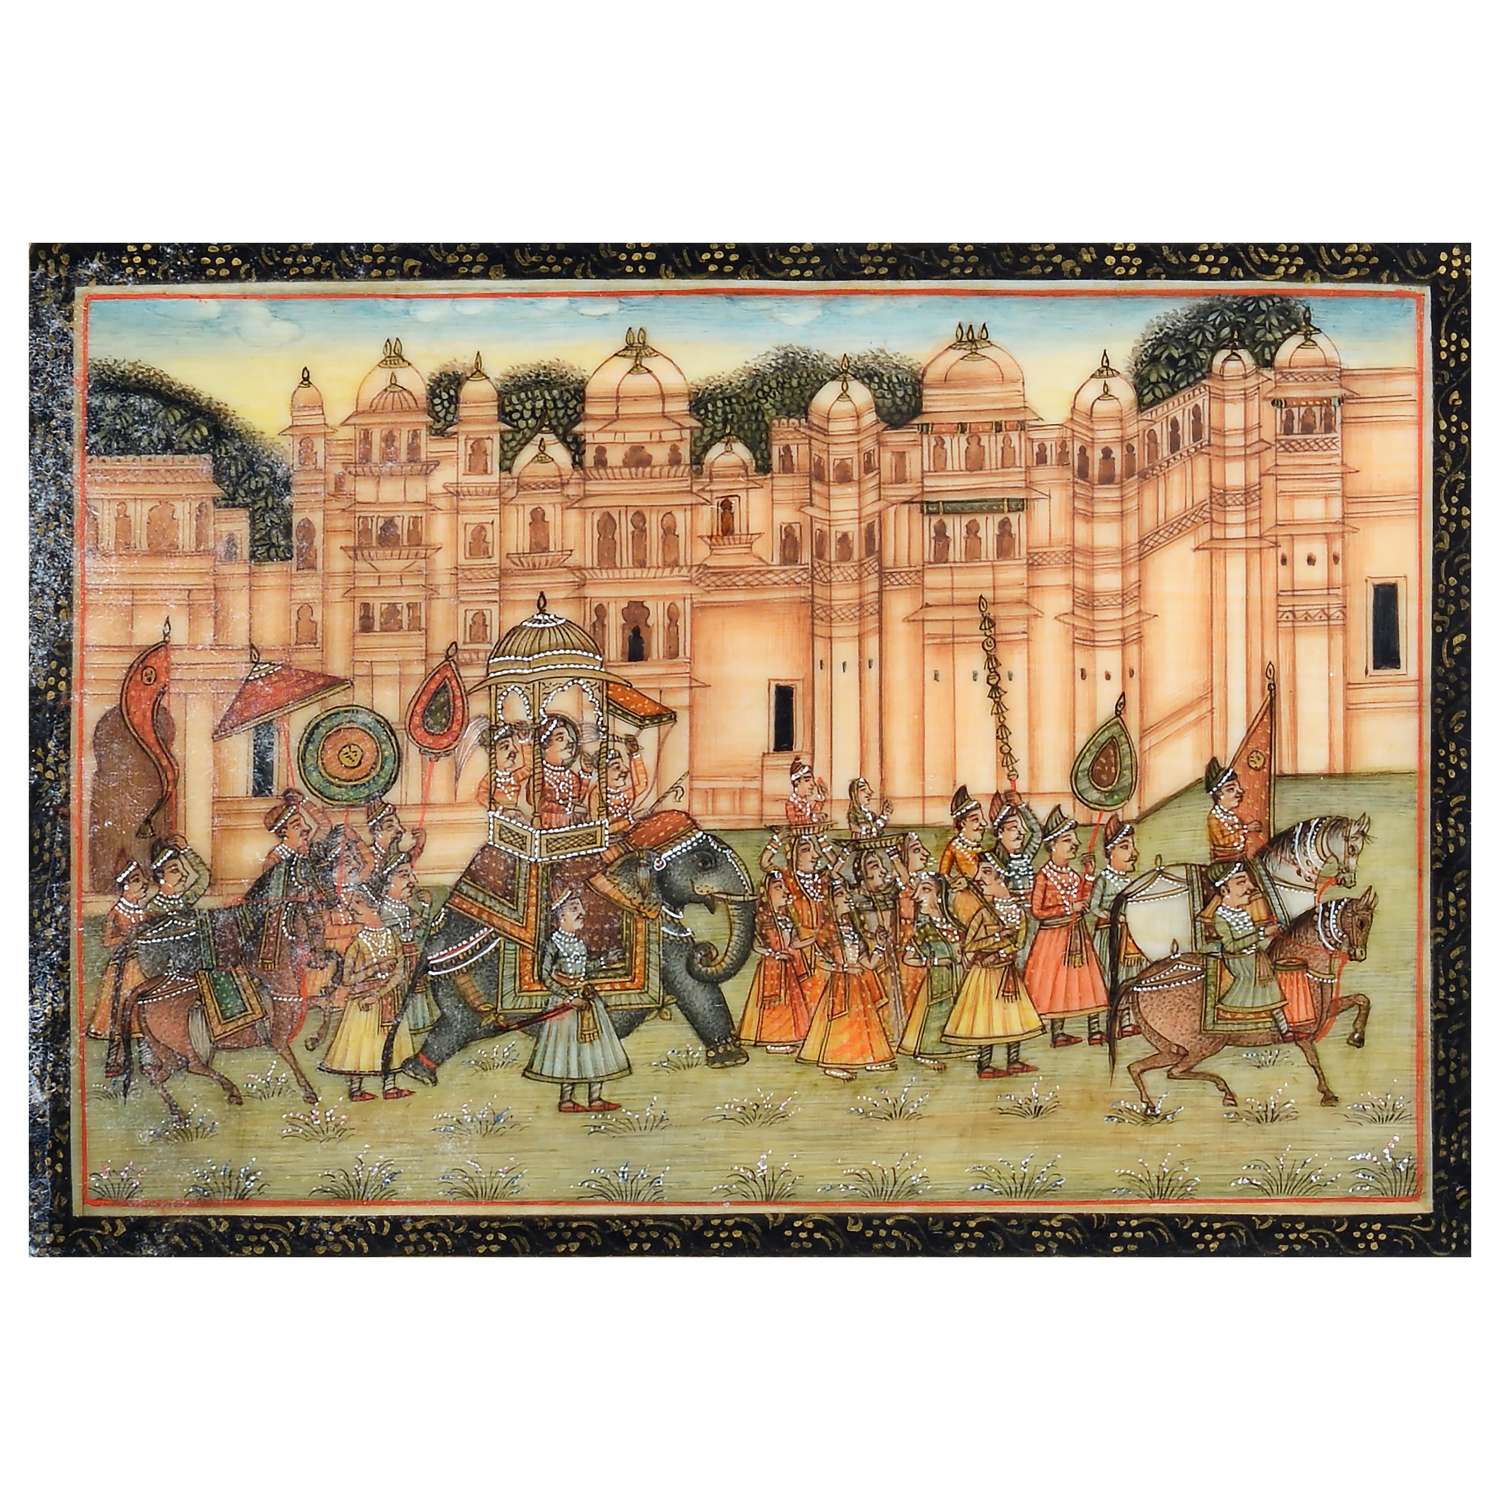 Indian Royal Procession